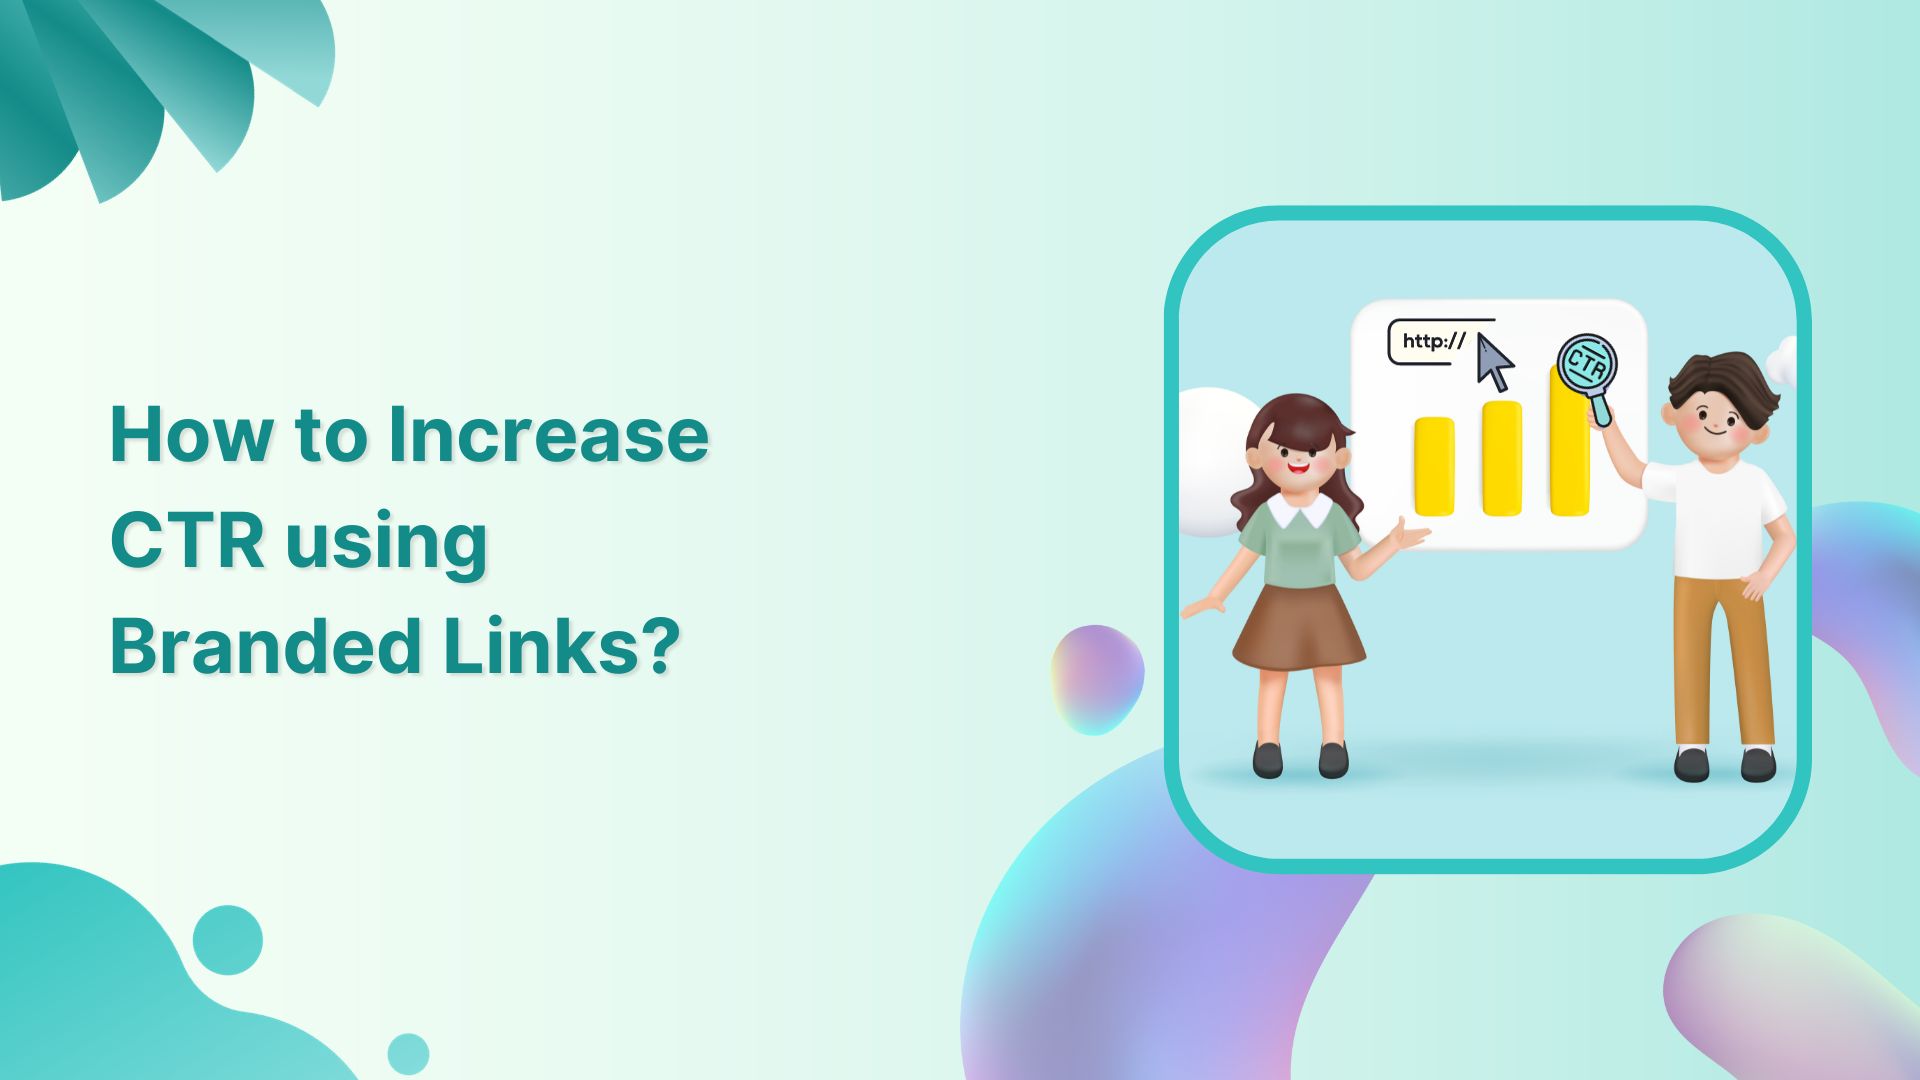 How to Increase Click-Through Rate (CTR) using Branded Links?